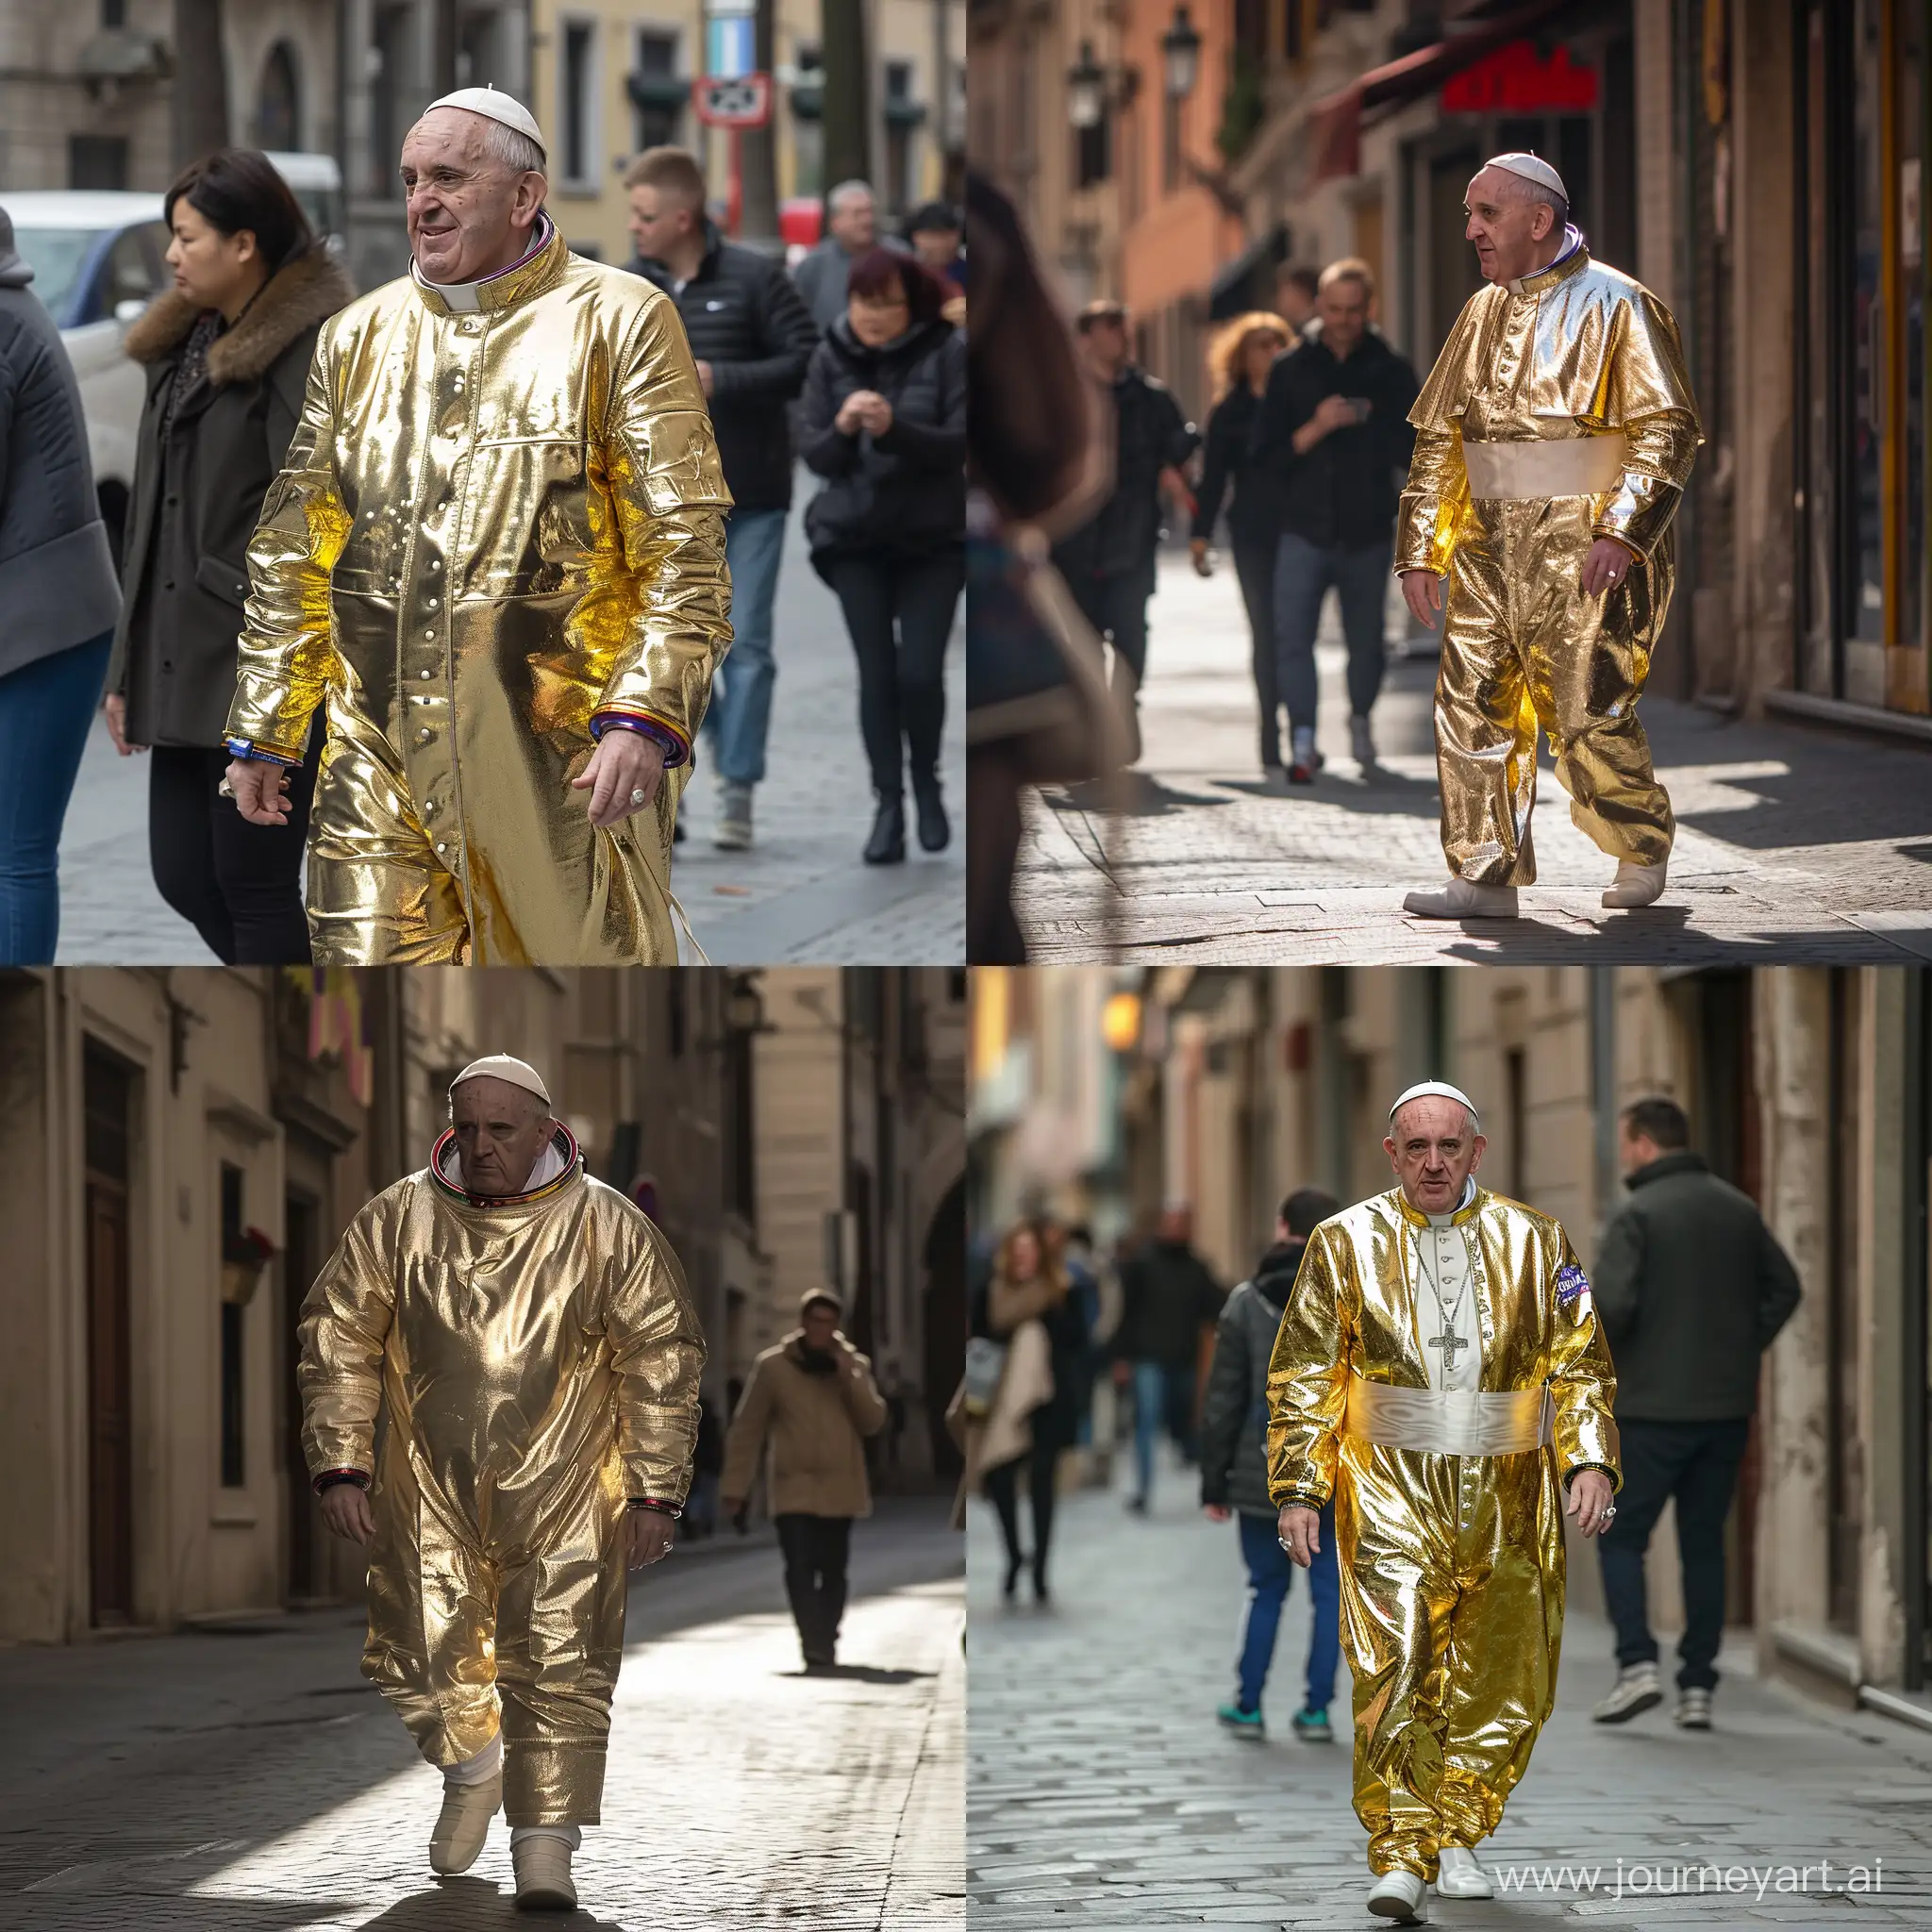 Pope-in-Golden-Space-Suit-Strolling-Through-Urban-Landscape